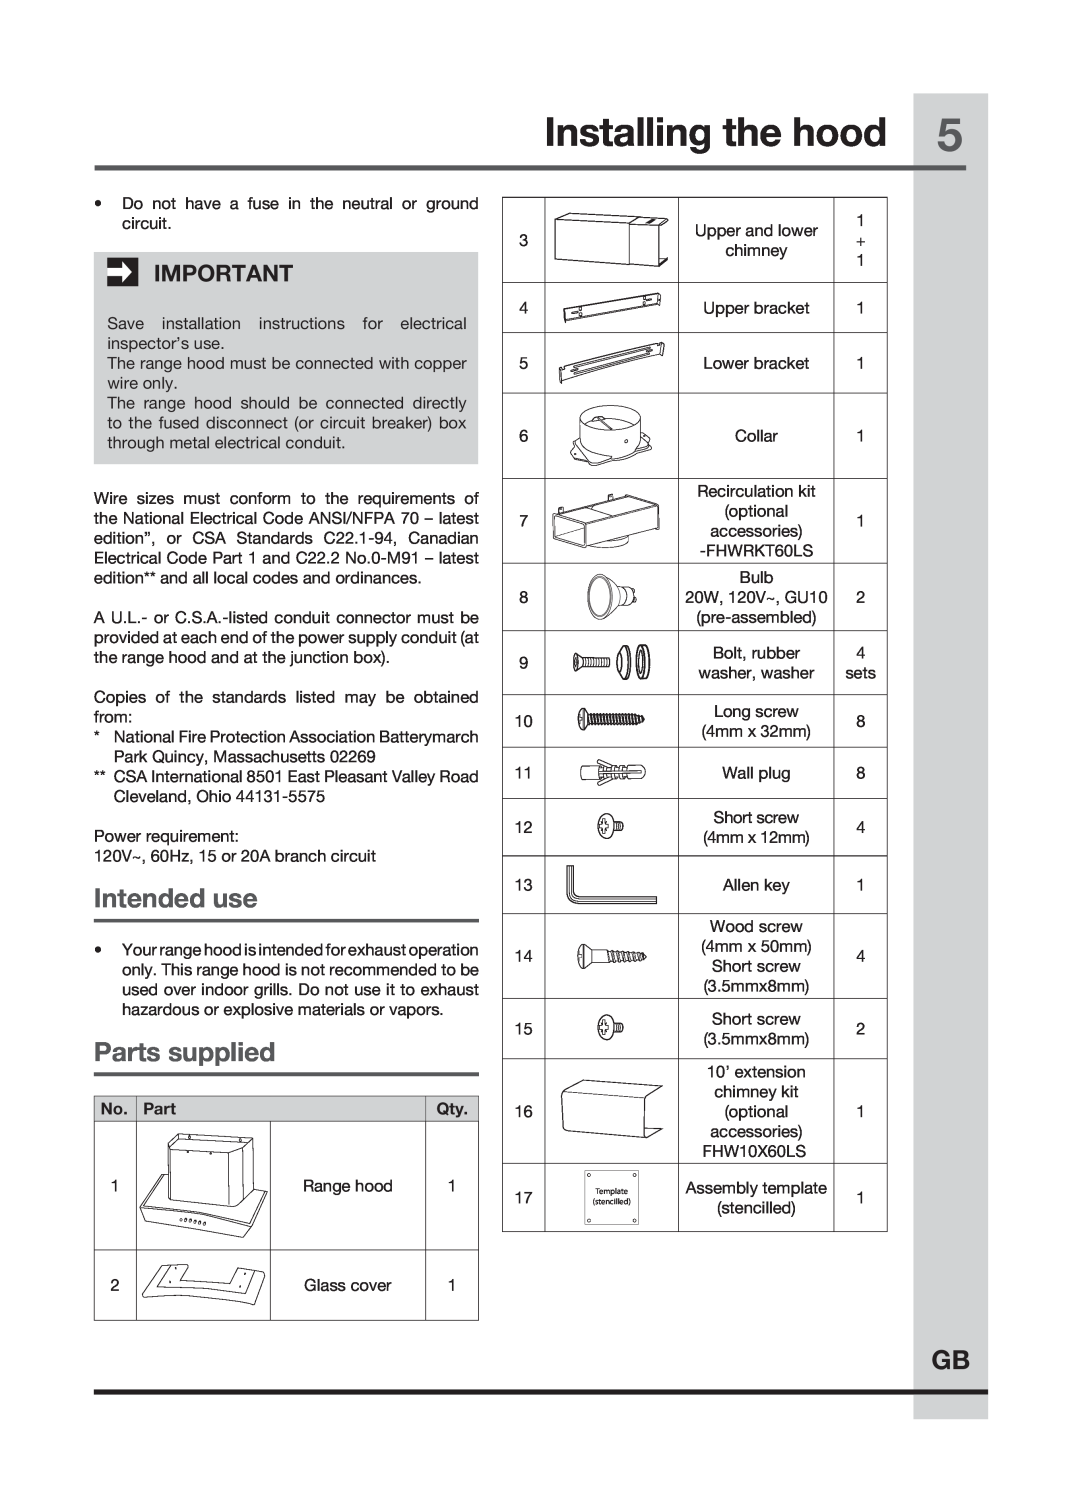 Frigidaire FHWC3060LS, FHWC3660LS, FHWC3655LS manual Installing the hood, Intended use, Parts supplied 